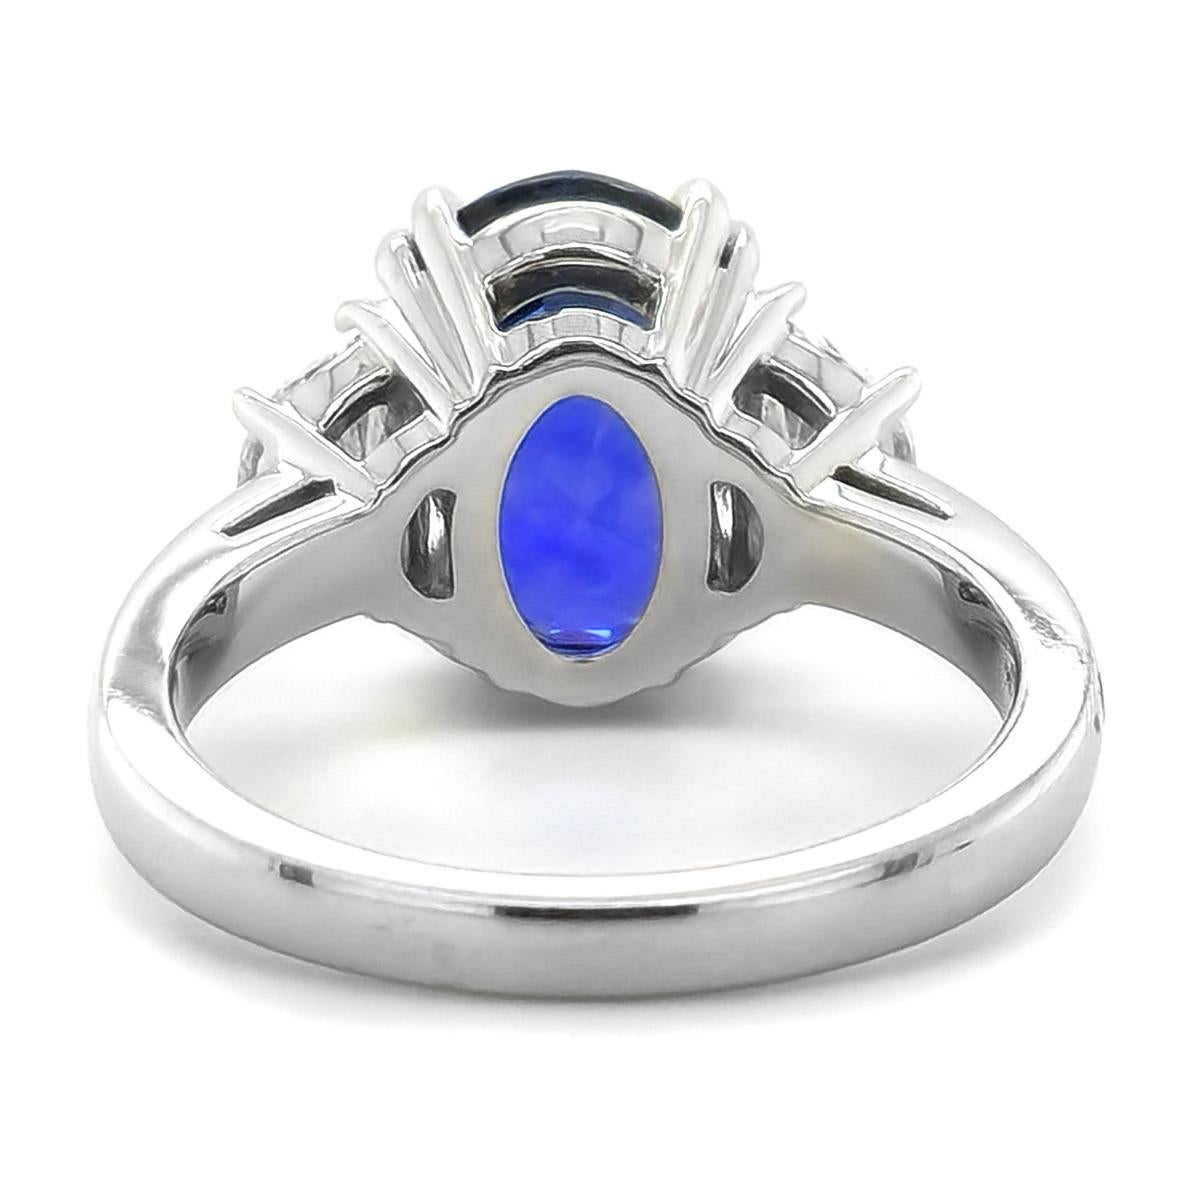 GIA Certified 5.62 Carat Blue Sapphire Diamond Platinum Ring, Fashion Ring In New Condition For Sale In Los Angeles, CA